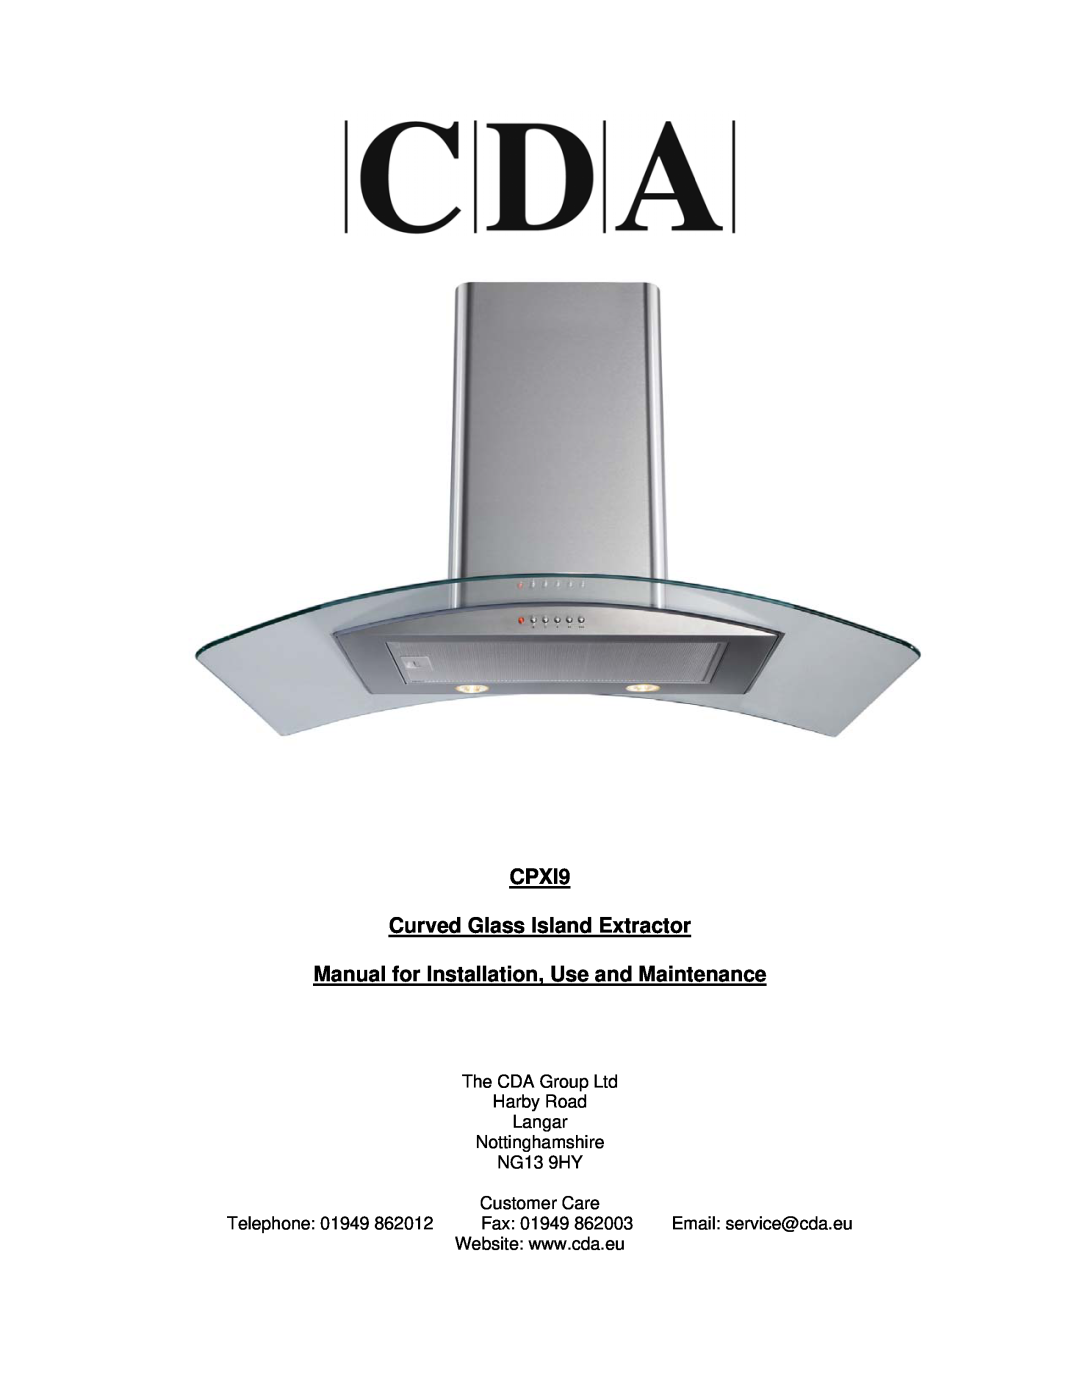 CDA manual CPXI9 Curved Glass Island Extractor, Manual for Installation, Use and Maintenance 